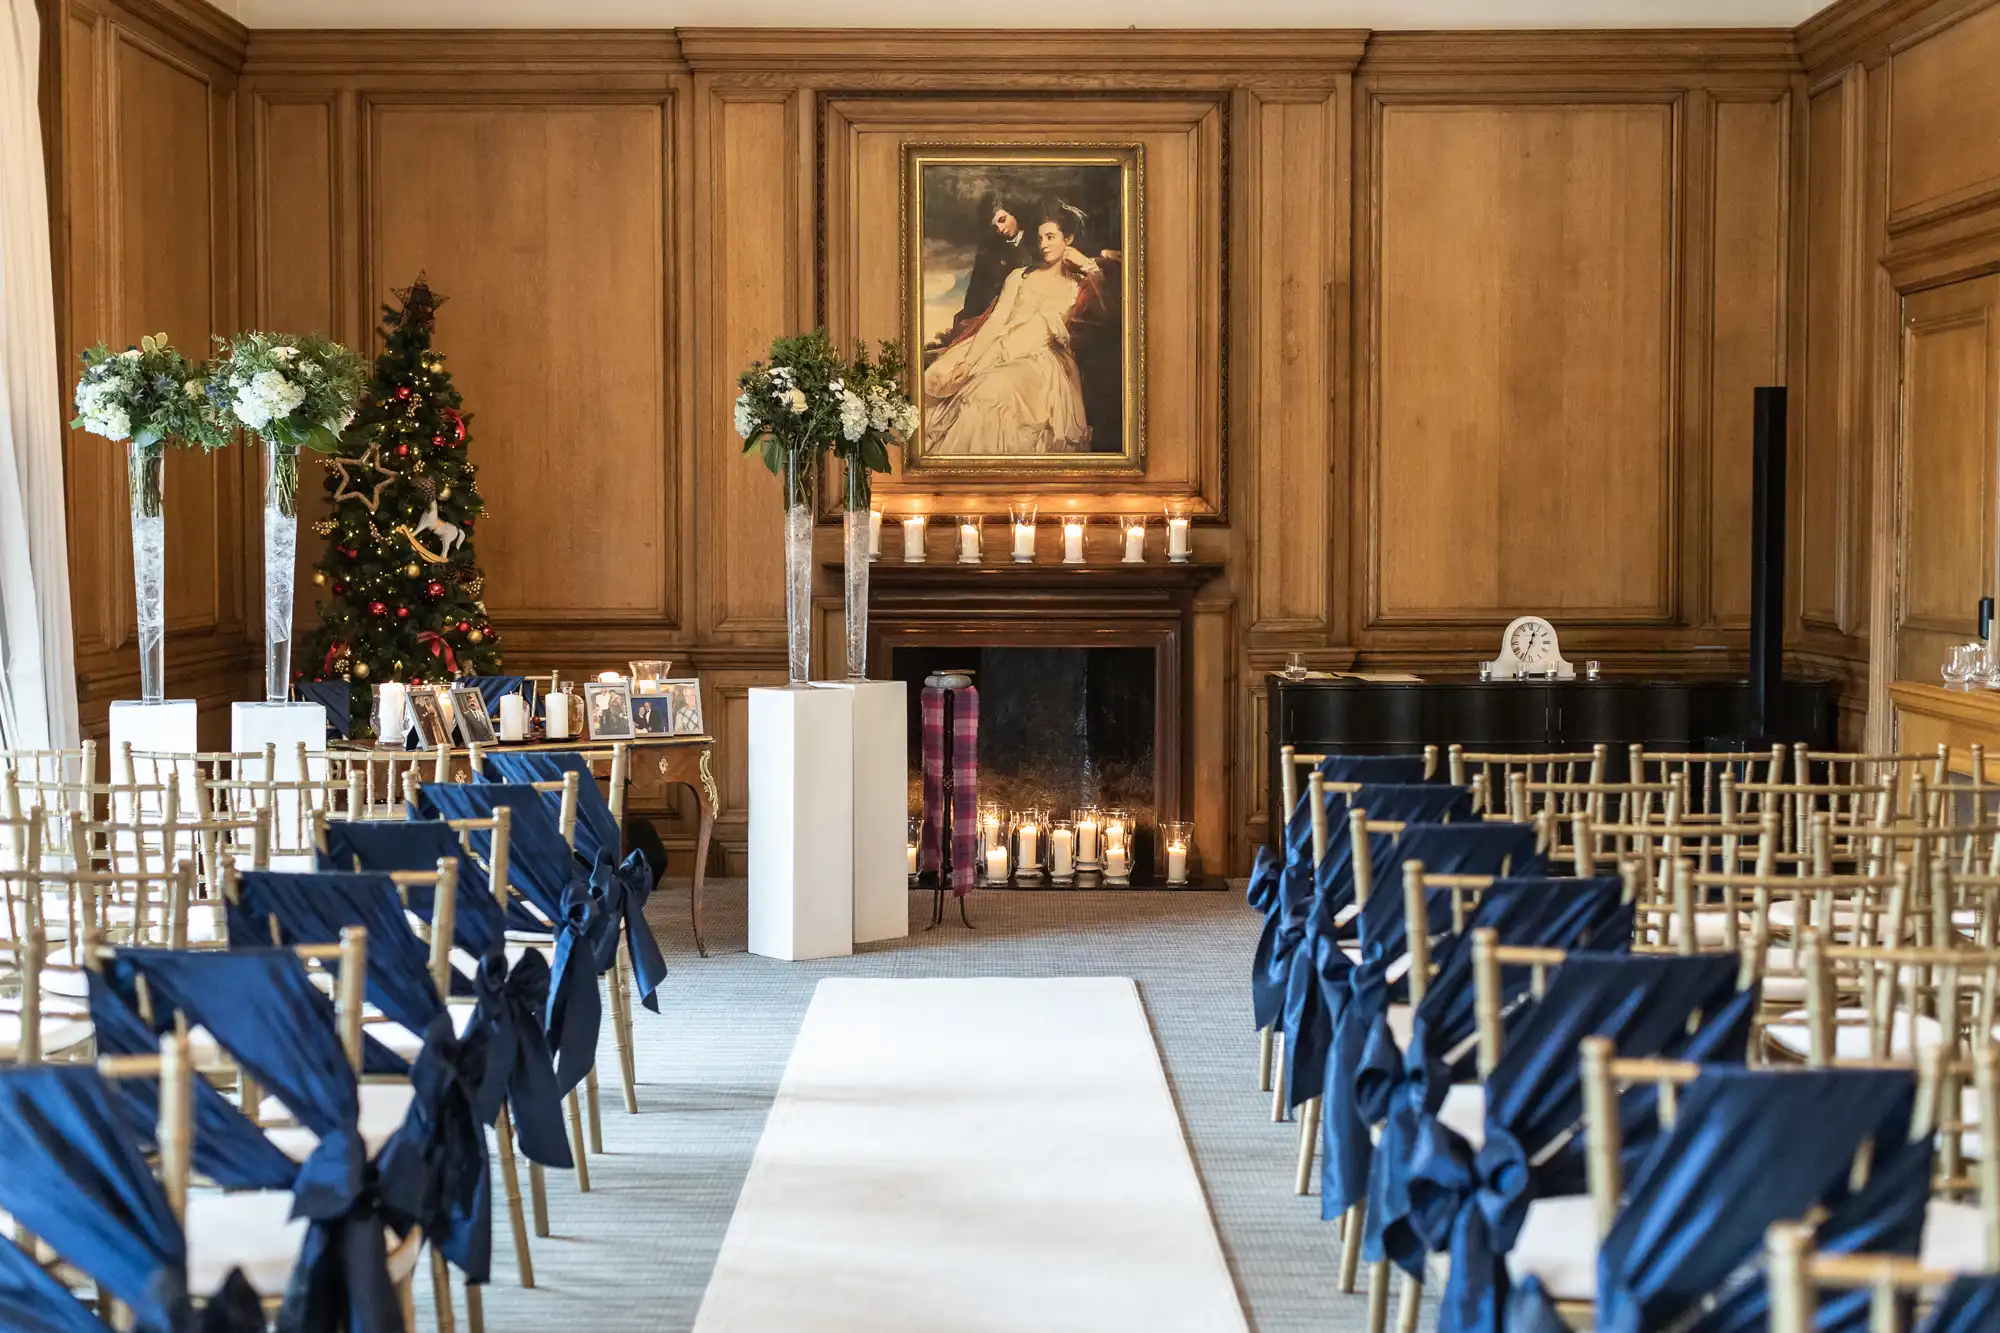 A wedding ceremony setup with rows of chairs adorned with blue bows facing an altar. The altar features floral arrangements, candles, and a painting above a fireplace. A decorated Christmas tree is visible.